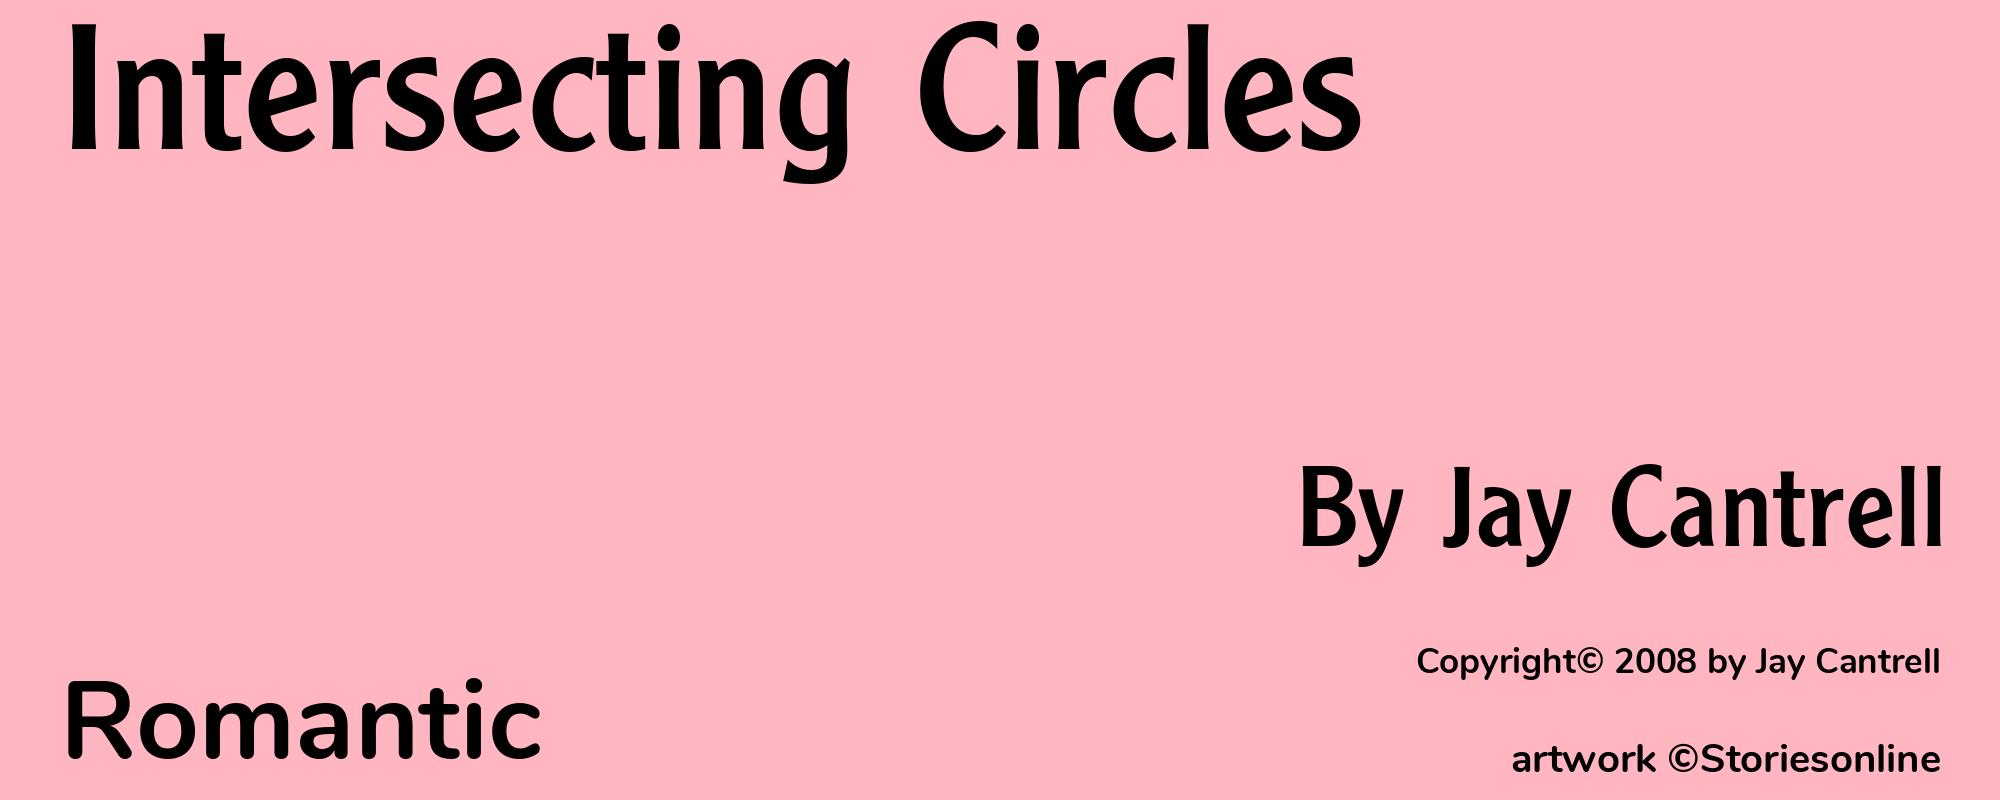 Intersecting Circles - Cover